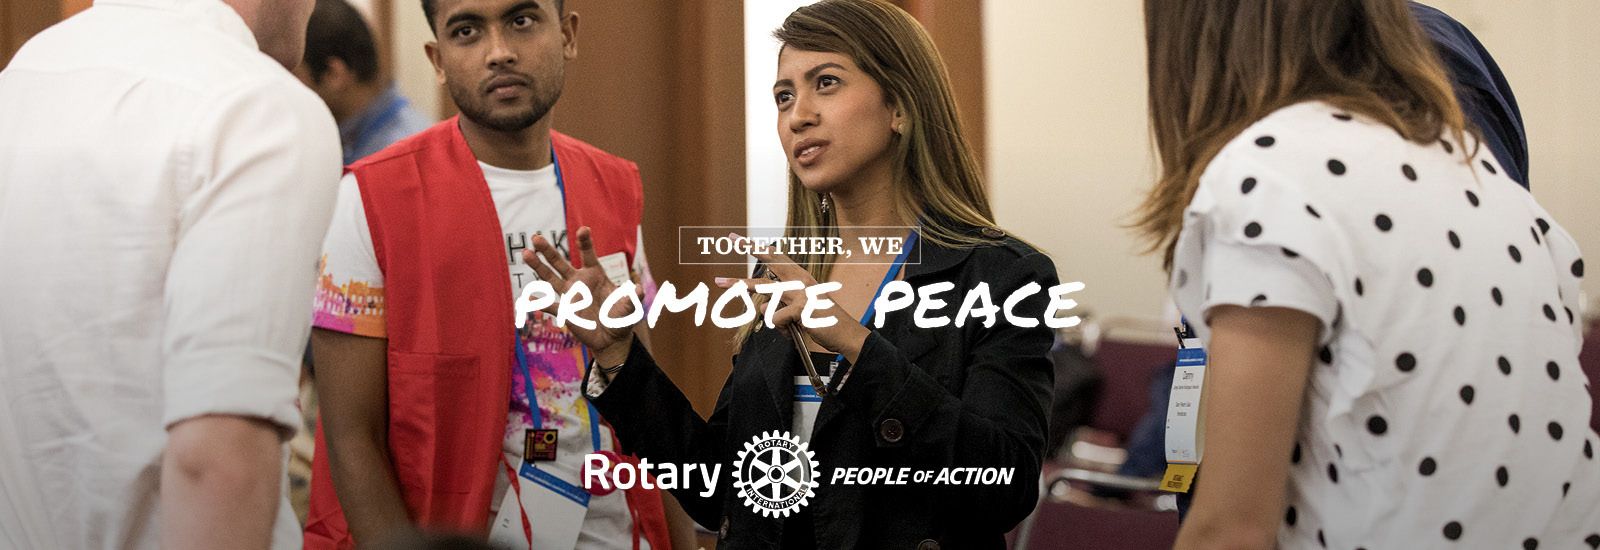 Together We Promote Peace